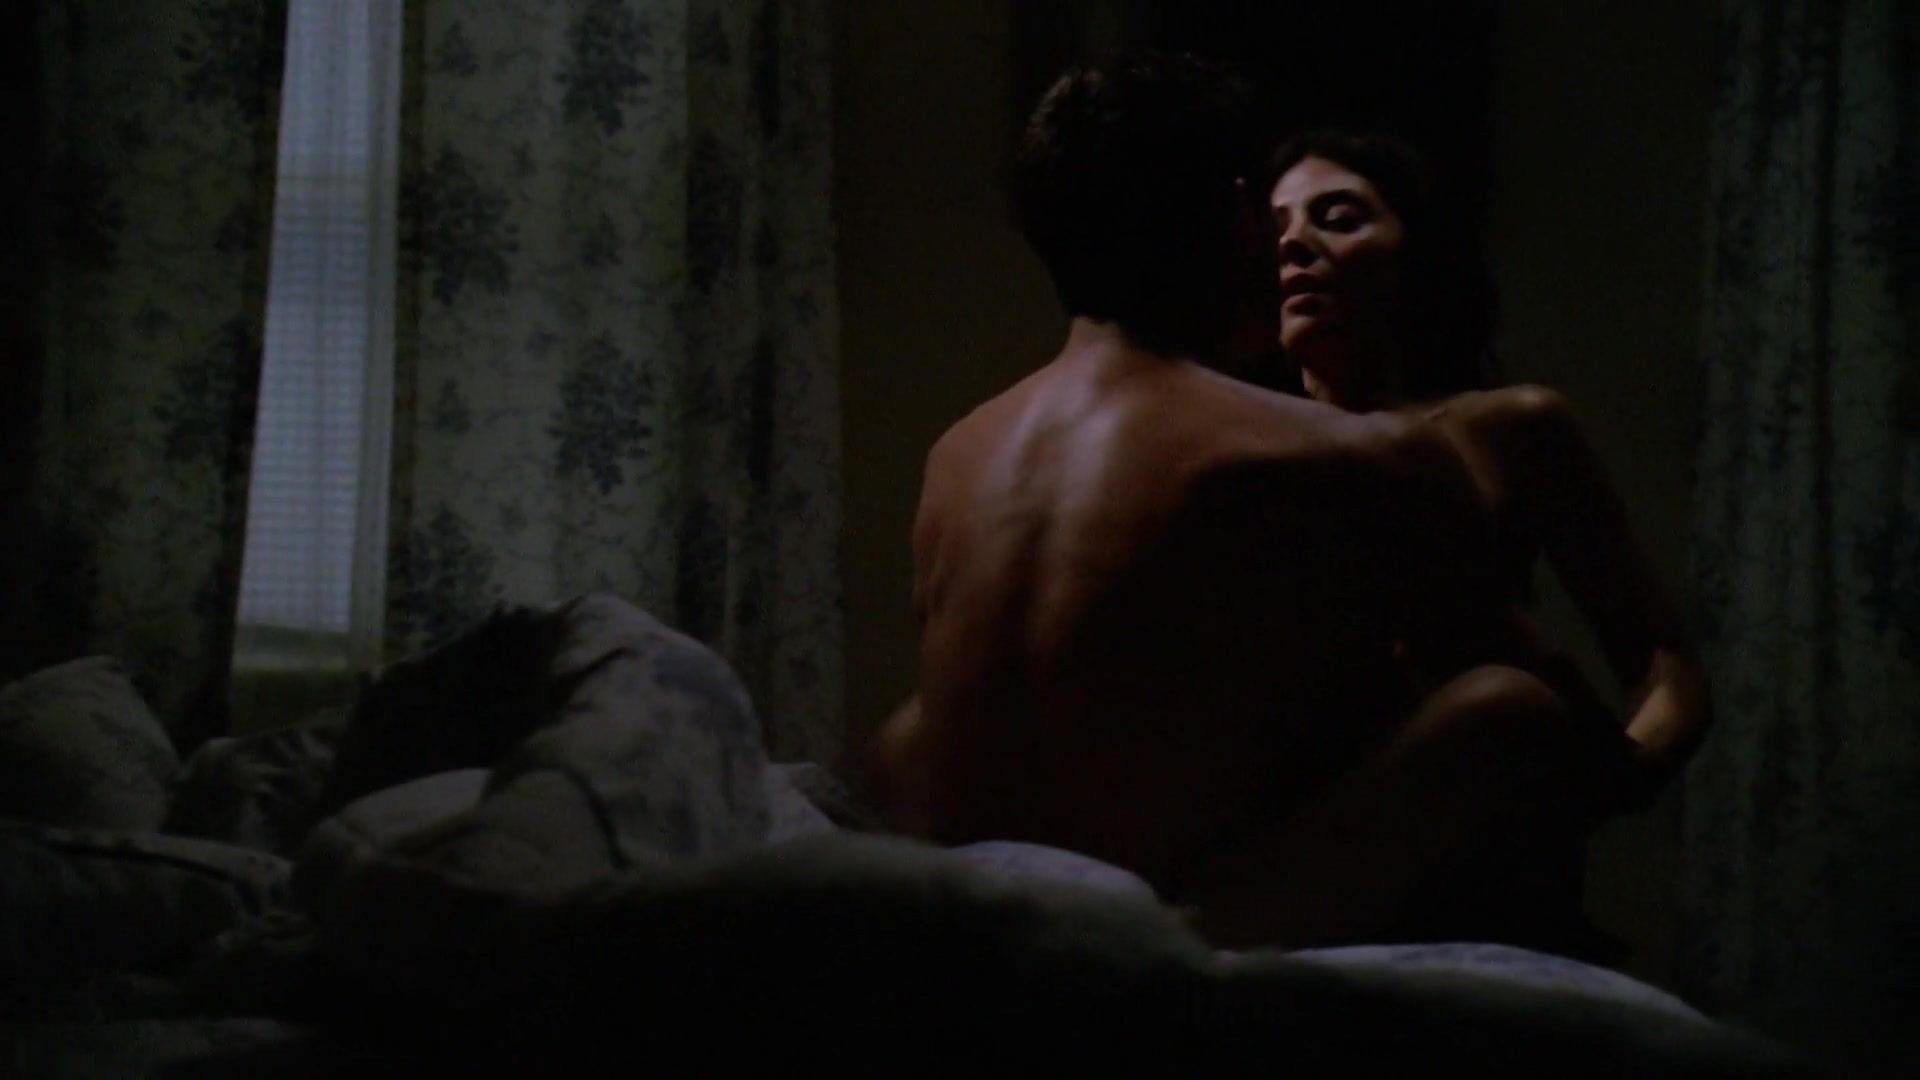 DuckDuckGo Sexy Callie Thorne naked -The Wire s02e06 (2003) Chubby